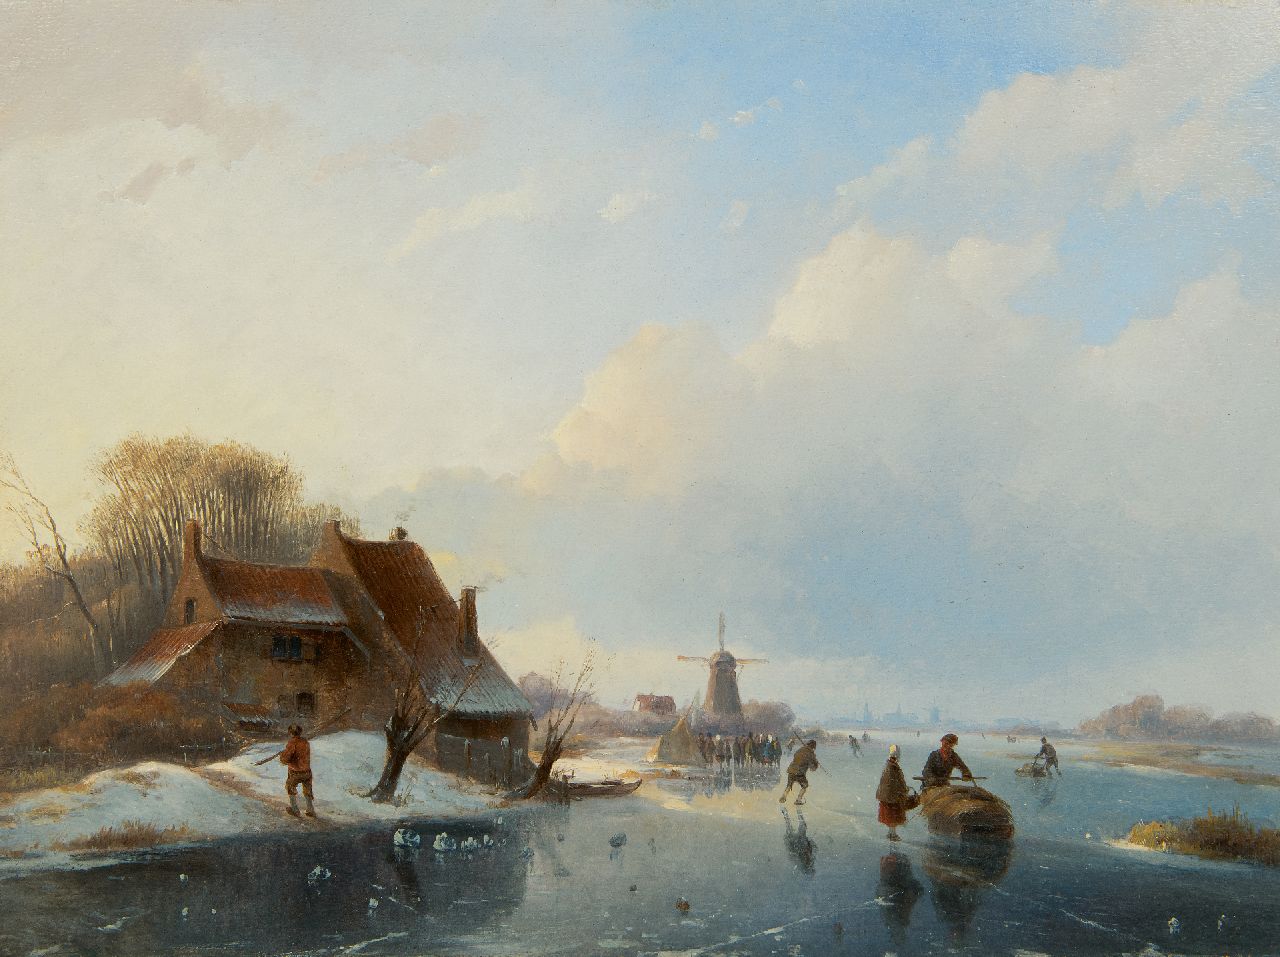 Vester W.  | Willem Vester, Clear winter's day on the ice, oil on panel 32.6 x 43.5 cm, signed l.l.